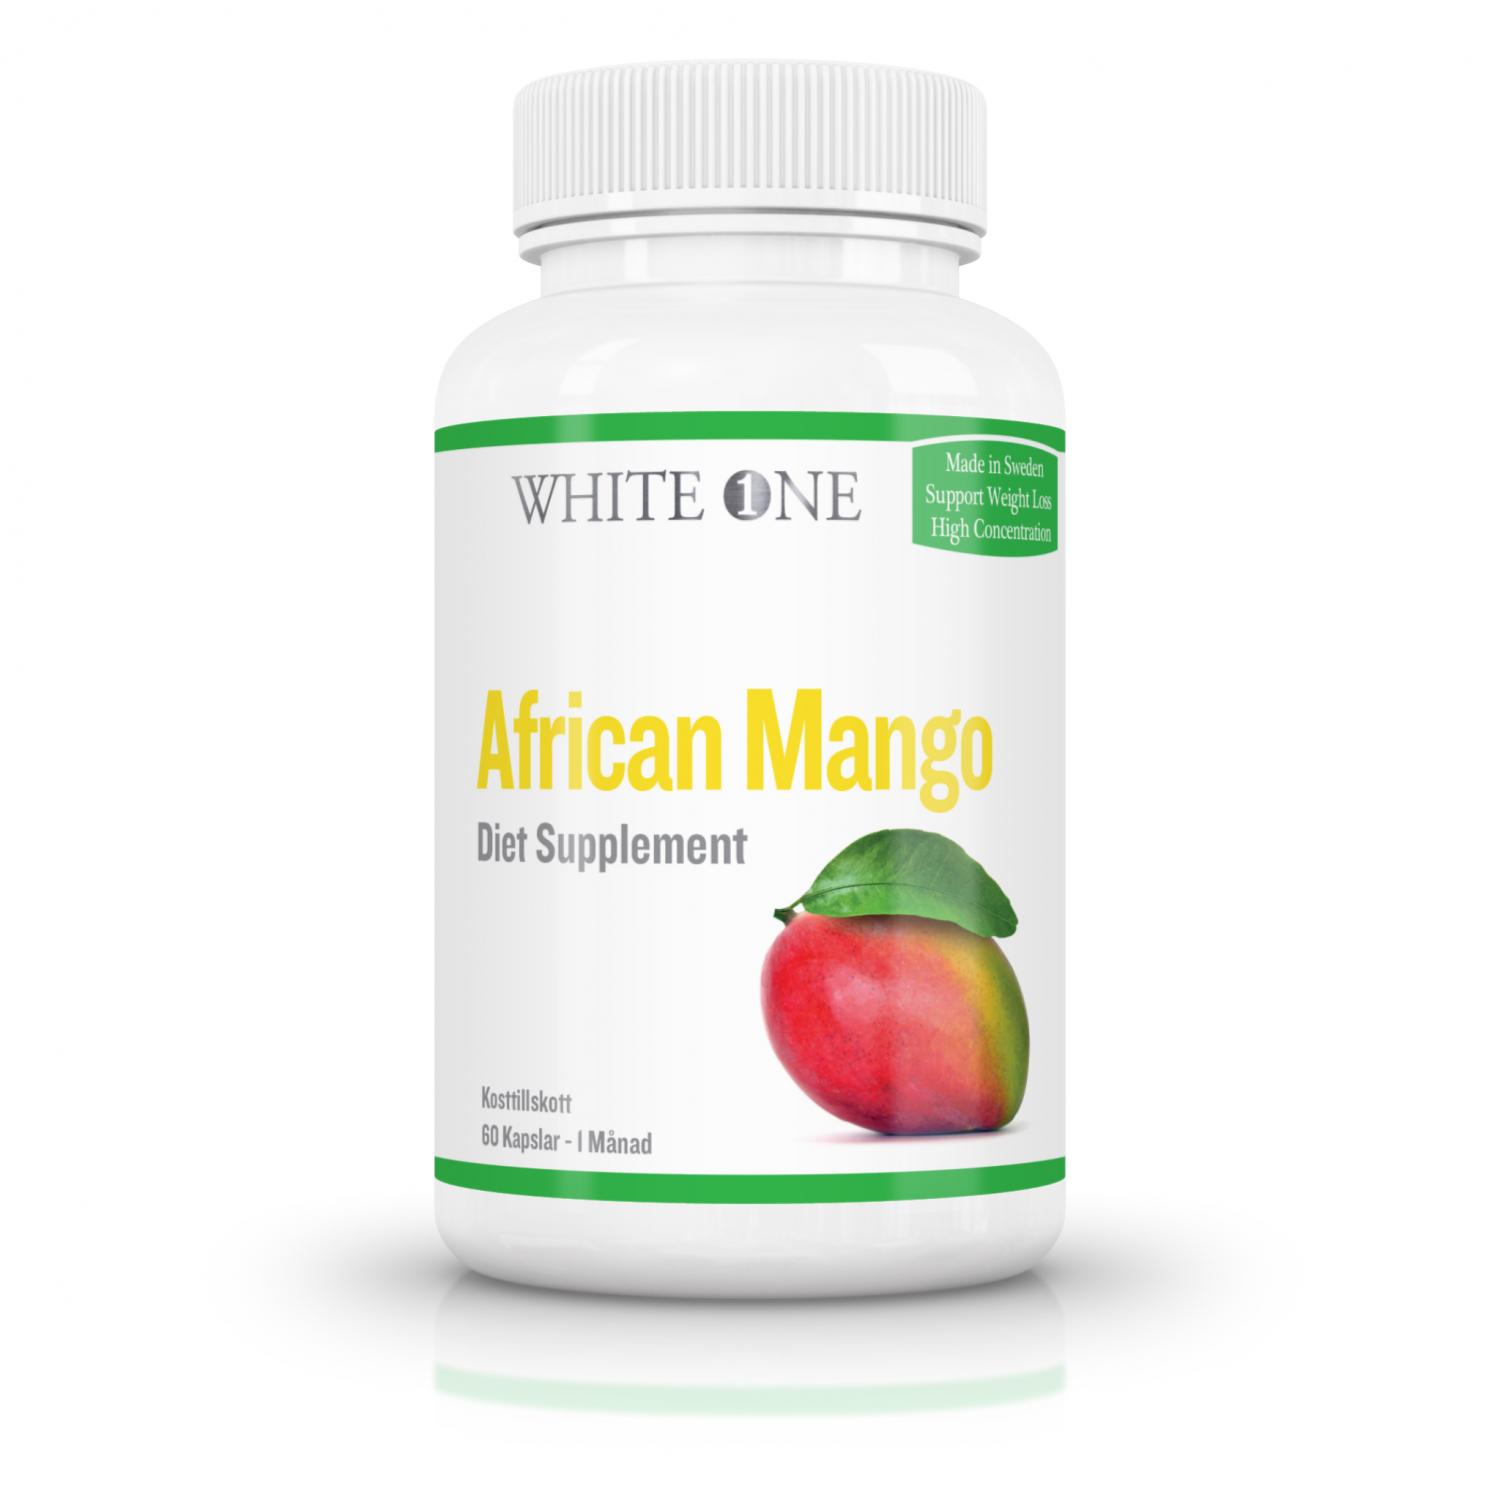 African Mango seed concentration